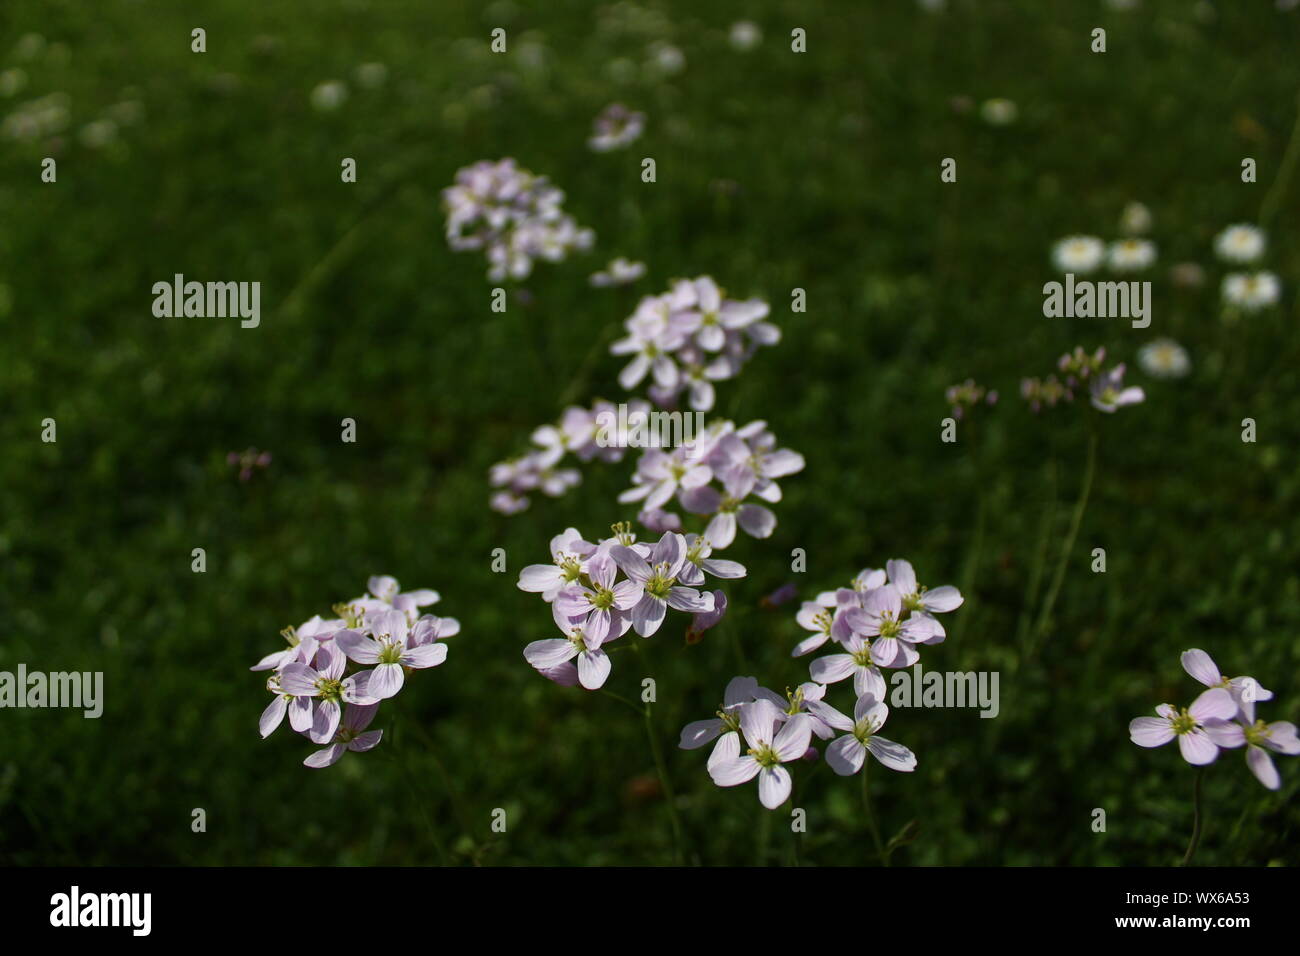 The picture shows a meadow with cuckoo flowers. Stock Photo